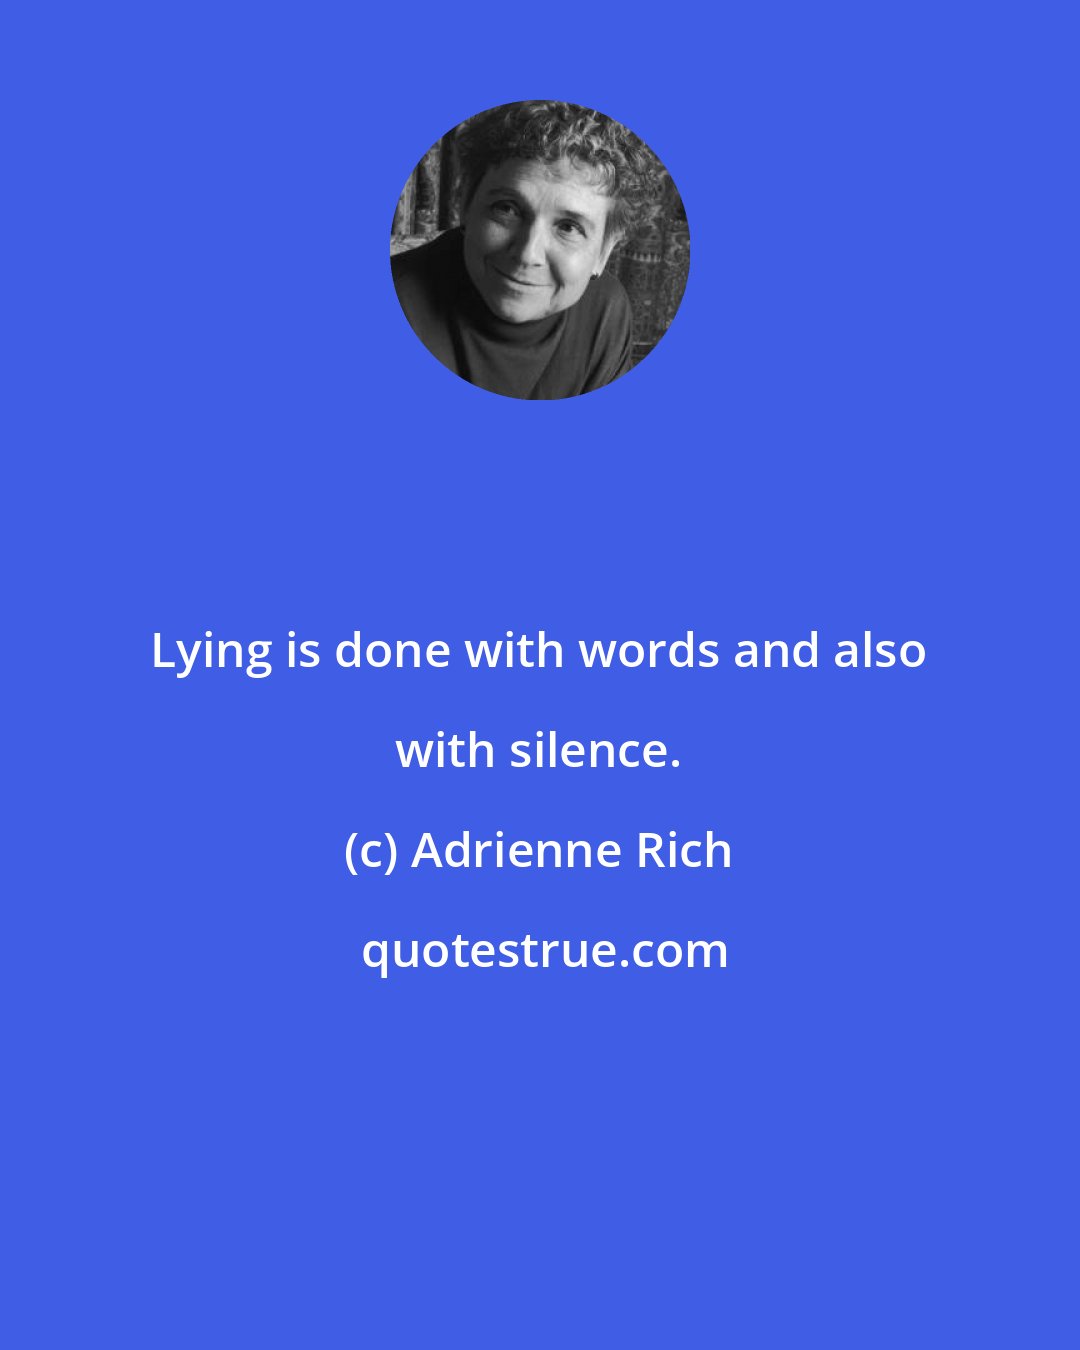 Adrienne Rich: Lying is done with words and also with silence.